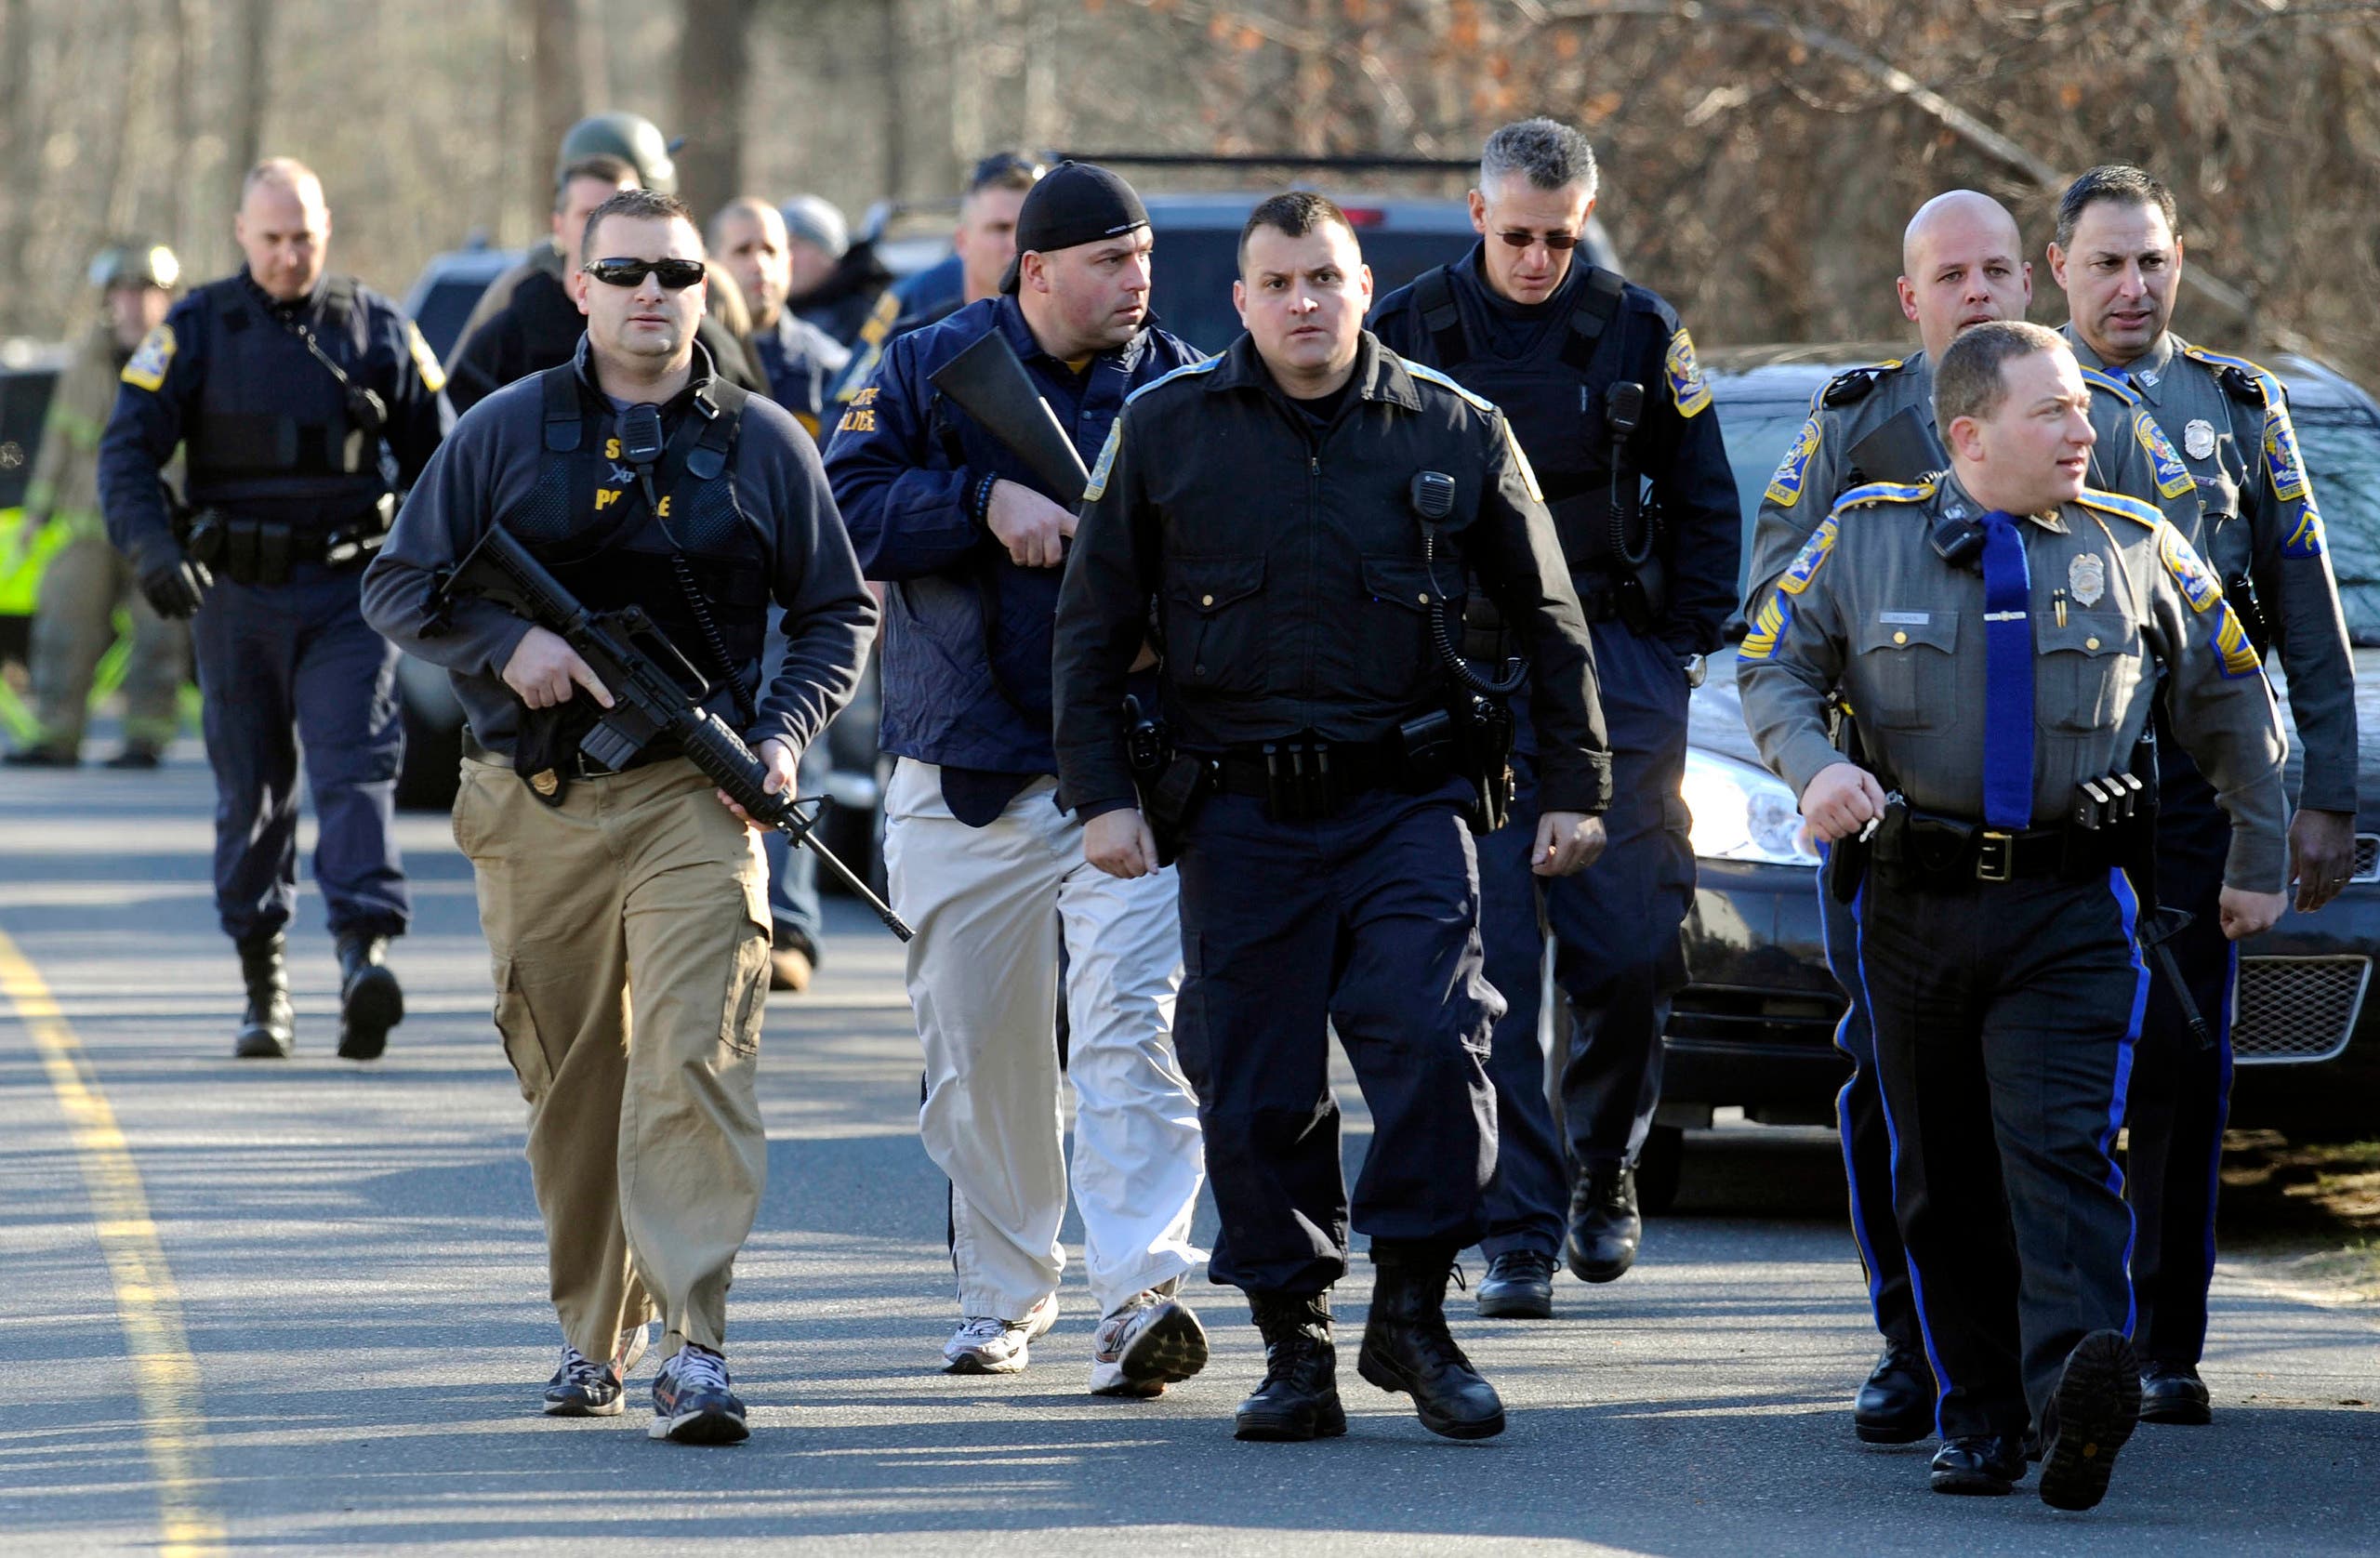 Law enforcement canvass the area following a shooting at the Sandy Hook Elementary School in Newtown, Conn. where authorities say a gunman opened fire, leaving 27 people dead, including 20 children, Friday, Dec. 14, 2012. (File photo: AP Photo/Jessica Hill)